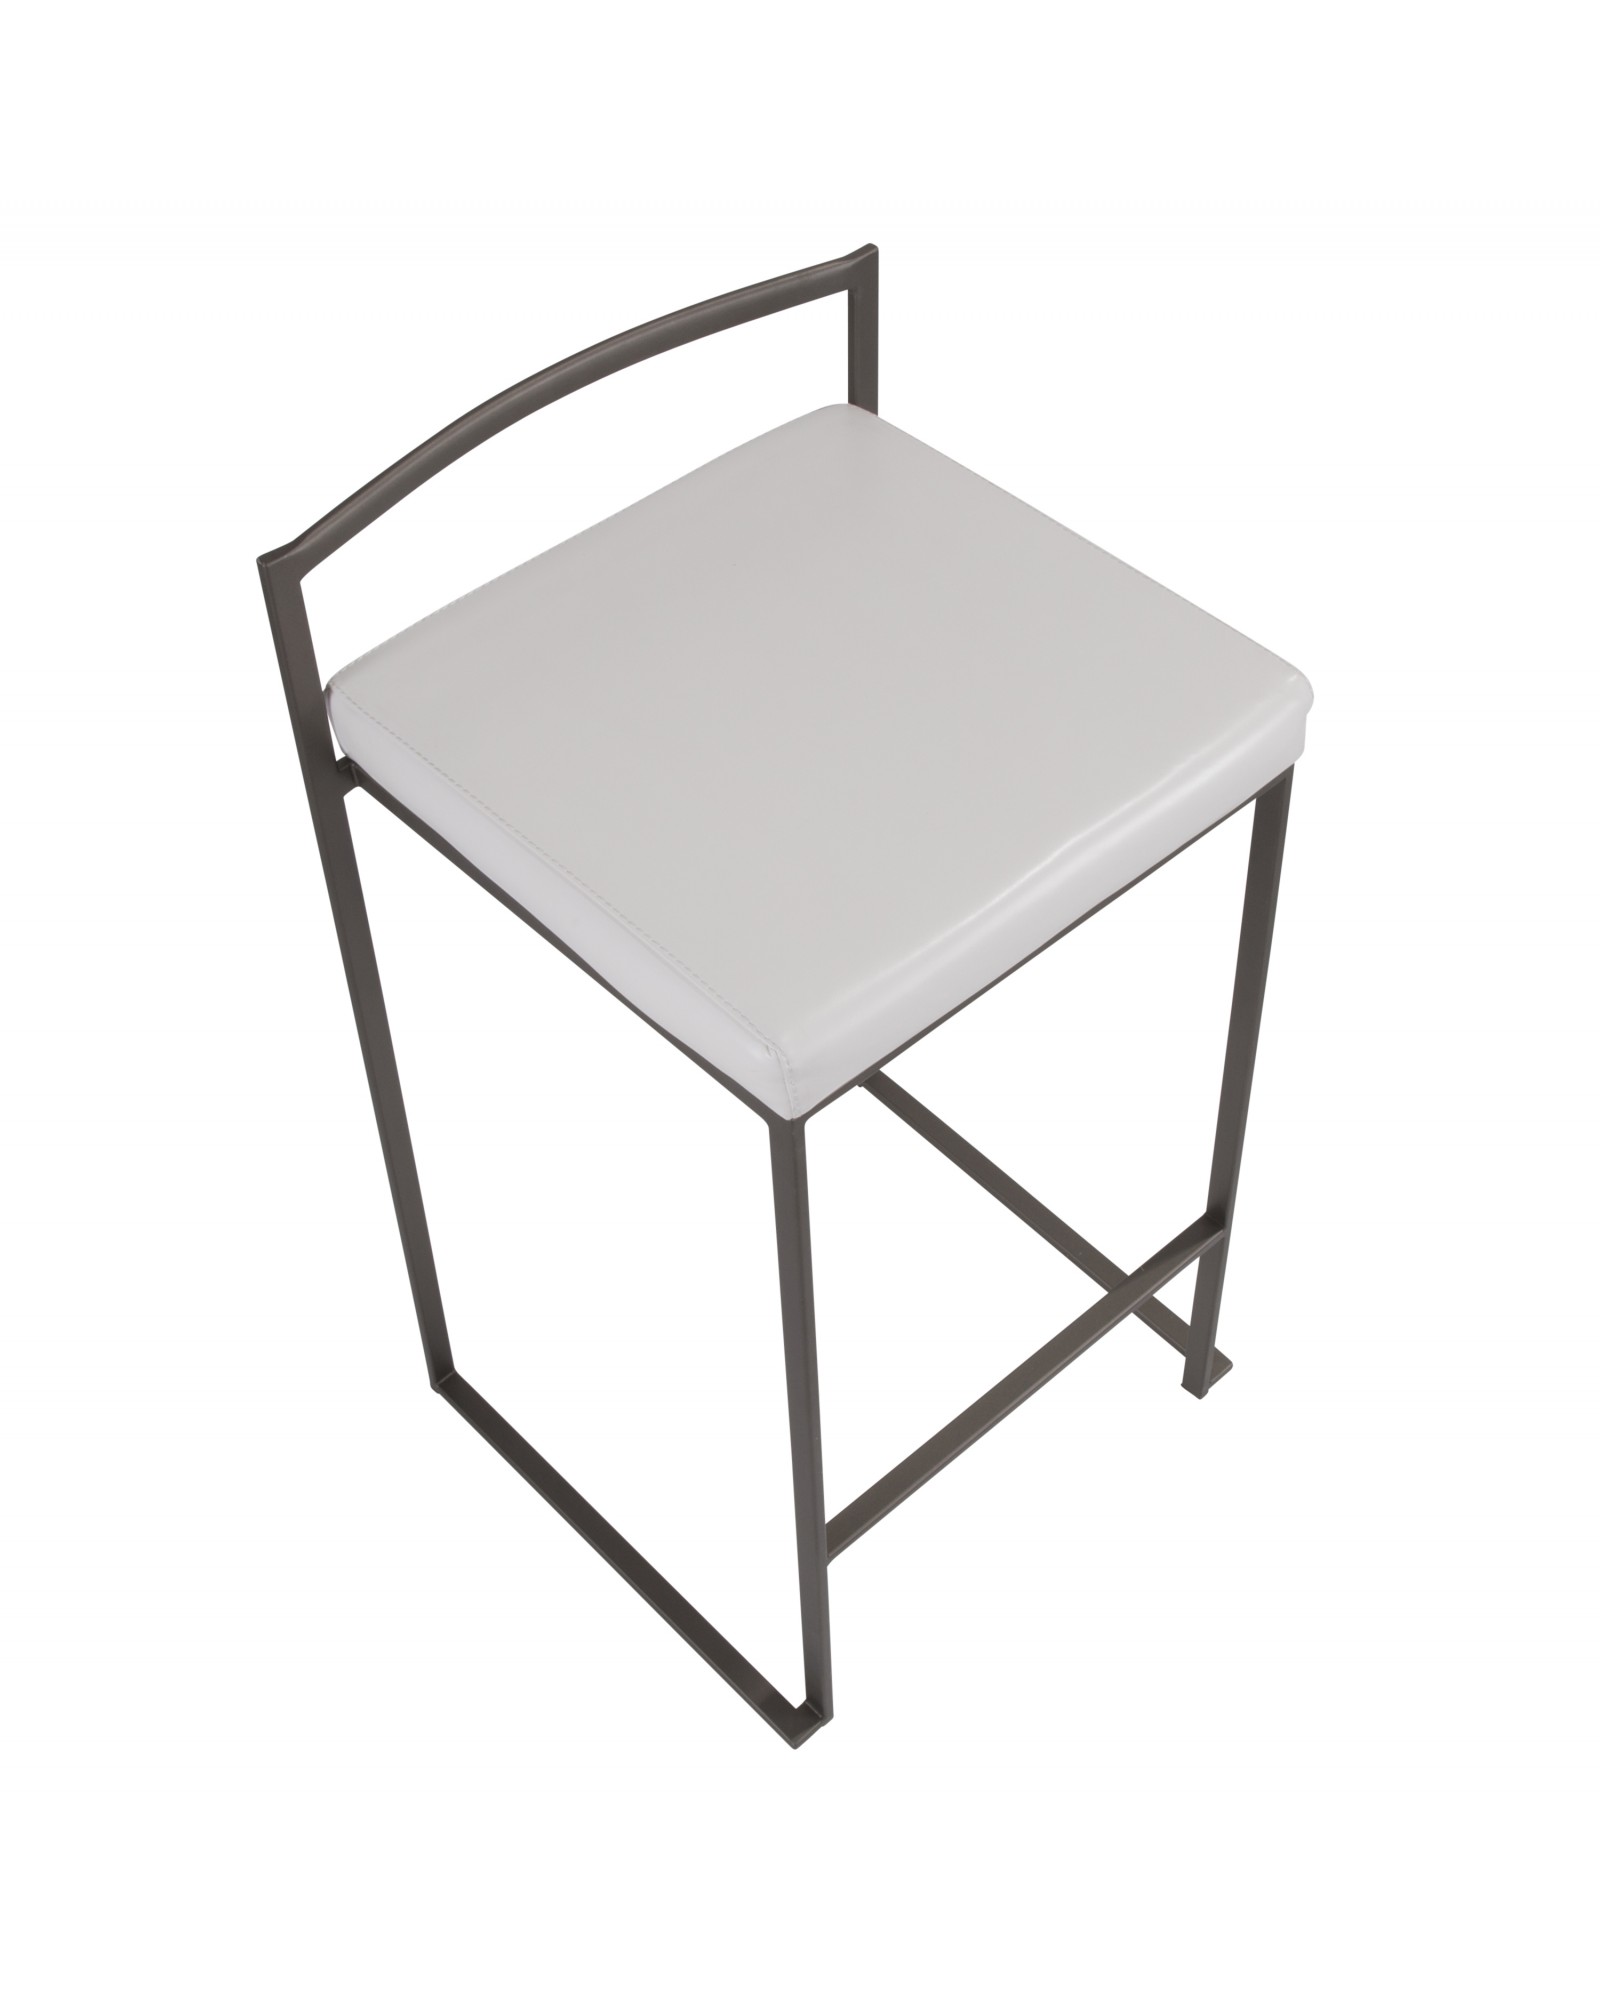 Fuji Industrial Stackable Counter Stool in Antique with White Faux Leather Cushion - Set of 2